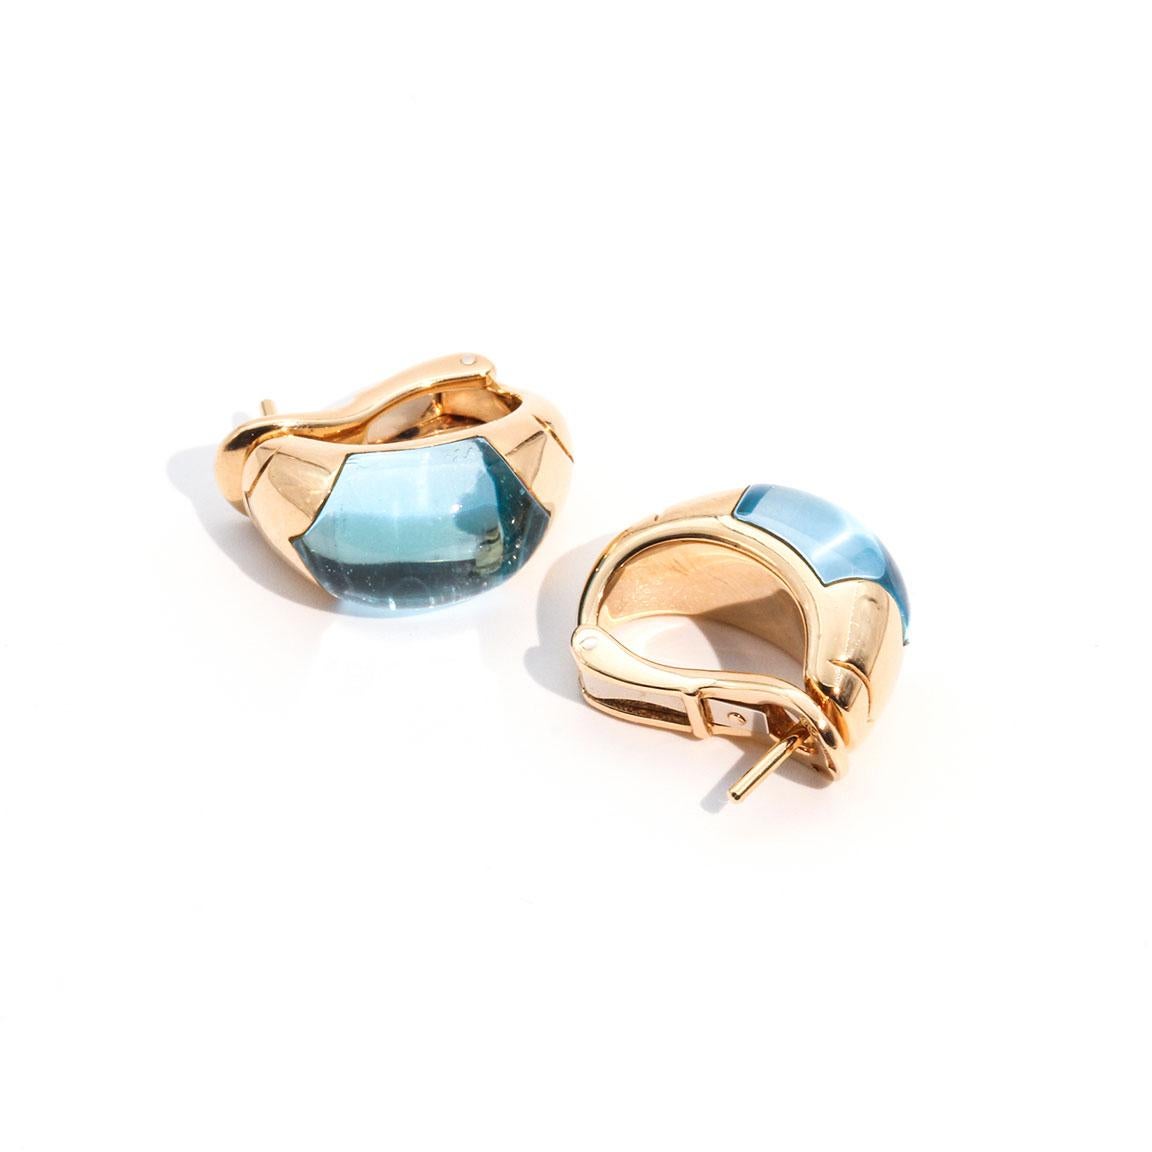 This stunning pair of 18 carat yellow gold Bvlgari Tronchetto earrings boast two beautiful central topaz modified cabochons. The Bvlgari Tronchetto earrings are presented in their original Bvlgari box. These Bvlgari Tronchetto earrings are elegant